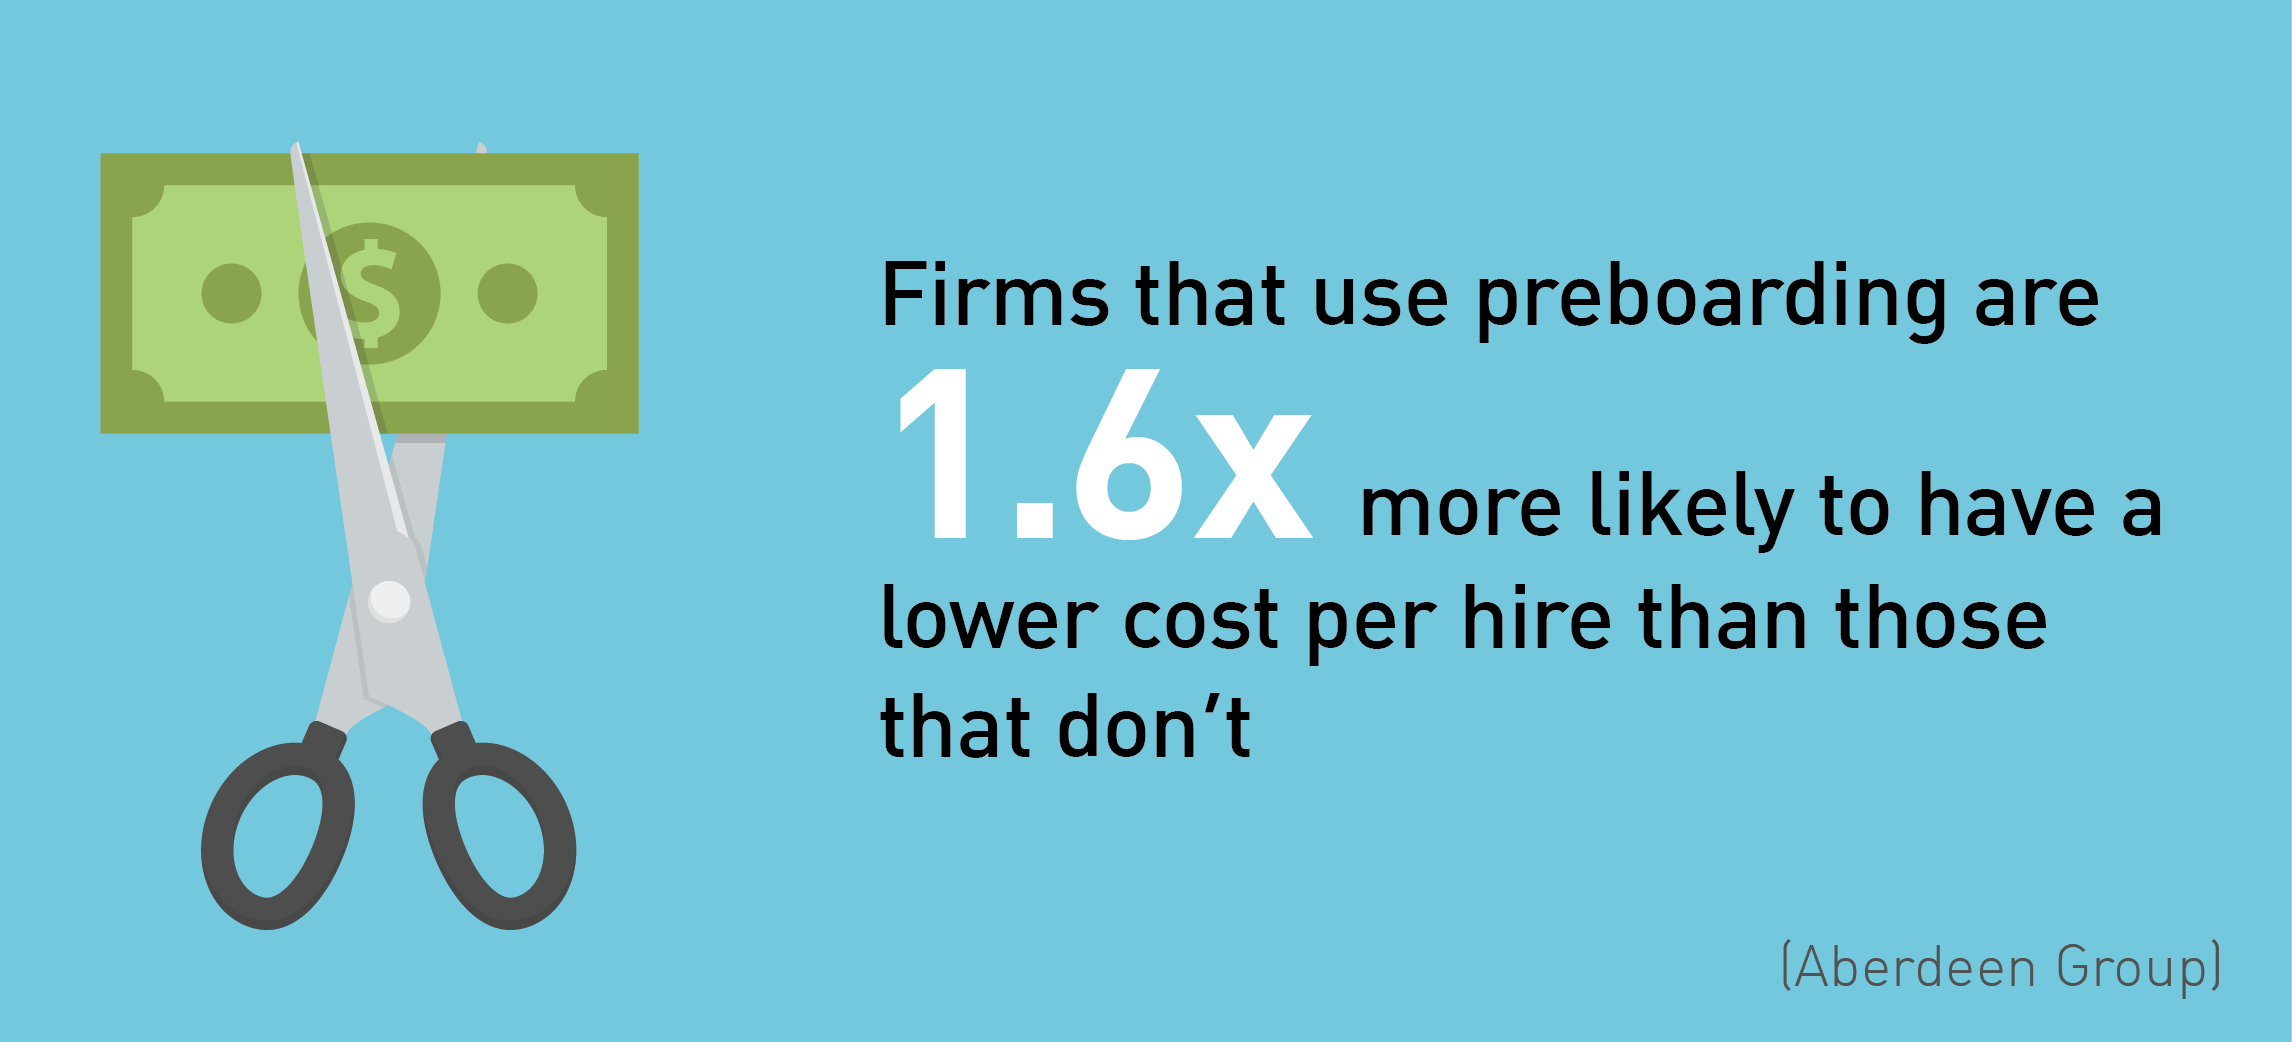 Firms that use pre-onboarding are 1.6X more likely to have a lower cost per hire